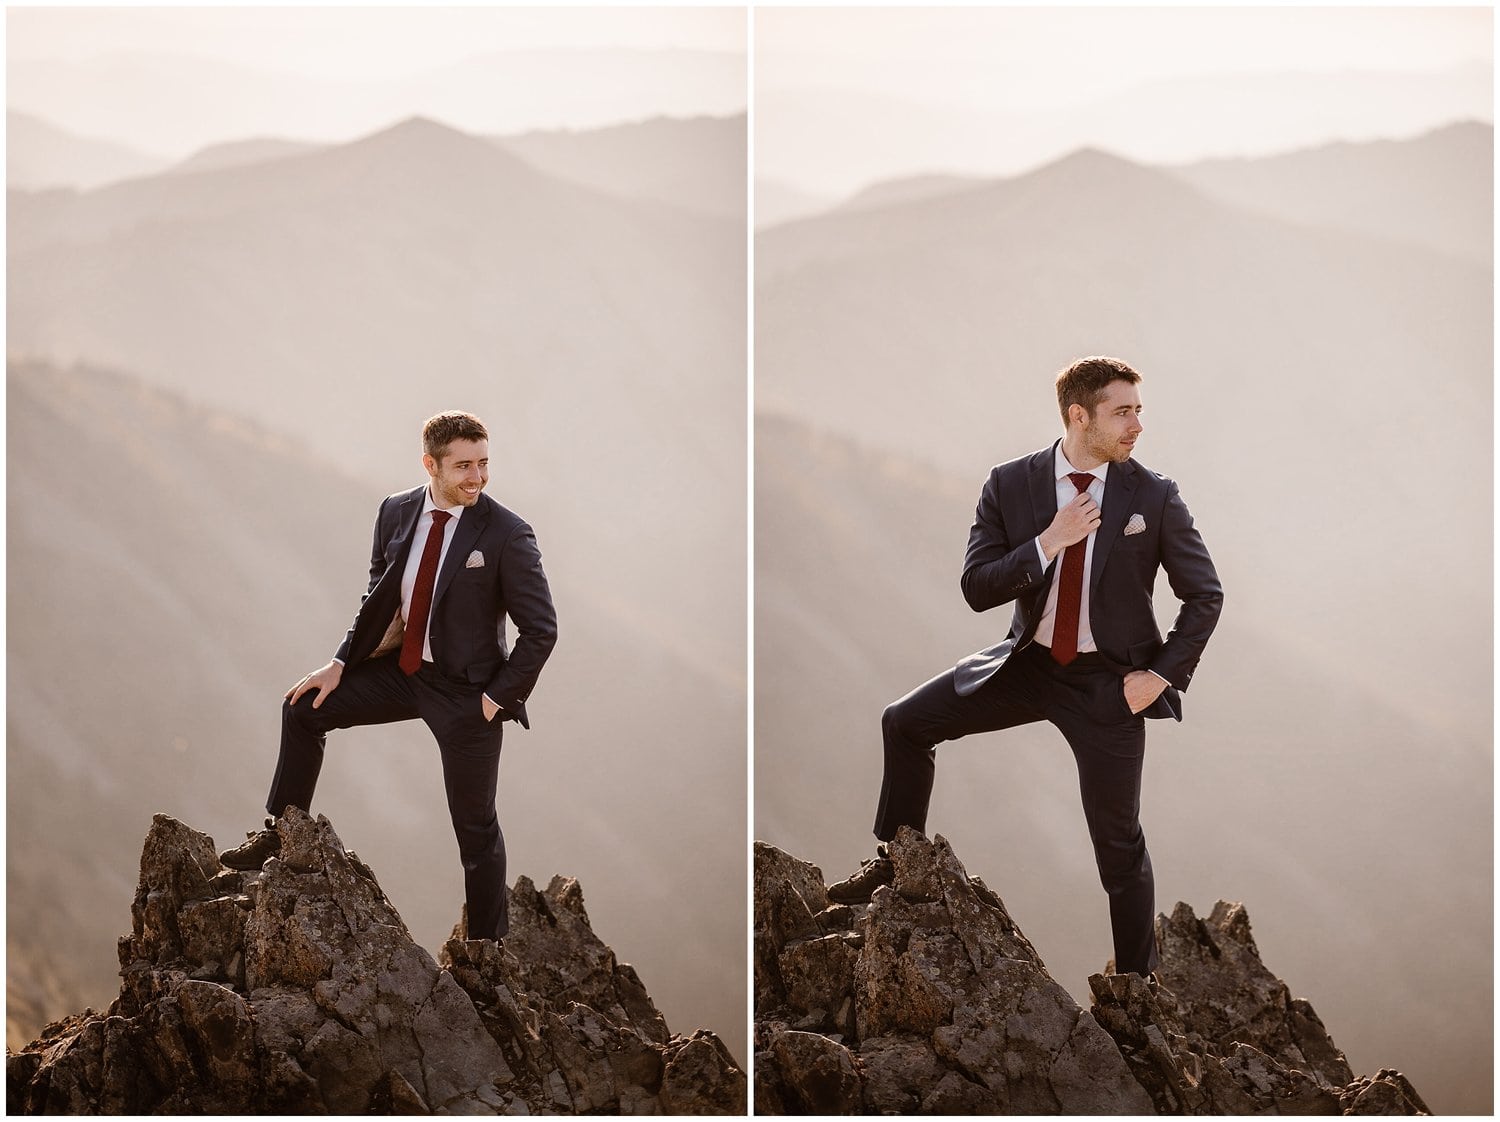 Groom is standing on rocky cliff and smiling, during sunrise in Washington. 